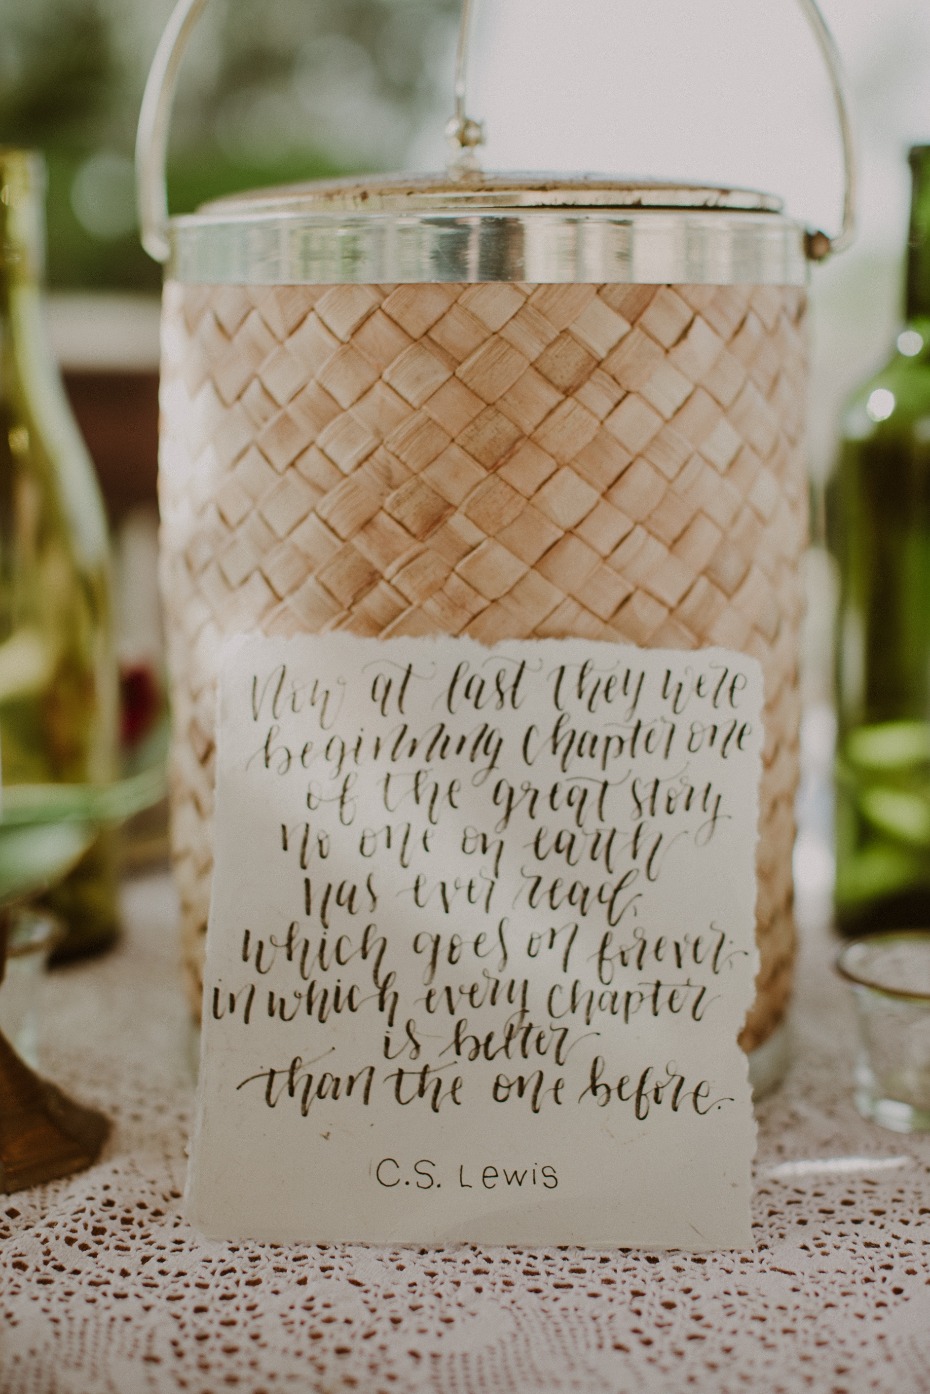 C.S. Lewis quote for your wedding day